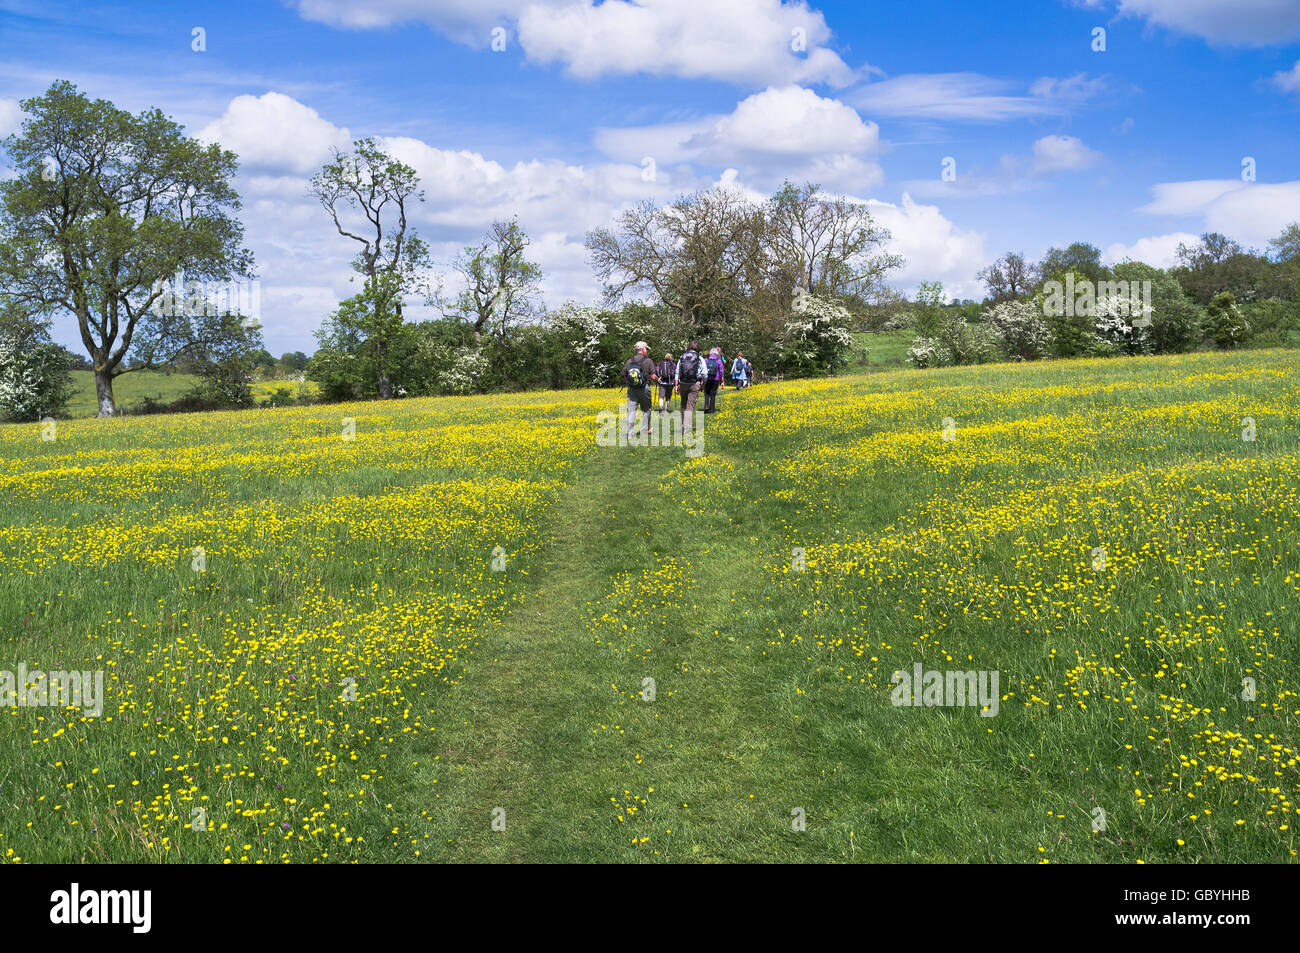 dh Cotswold Way COTSWOLDS GLOUCESTERSHIRE Winchcombe Walking festival gruppo rambler escursionismo buttercup campo sentiero inglese campagna inghilterra Foto Stock